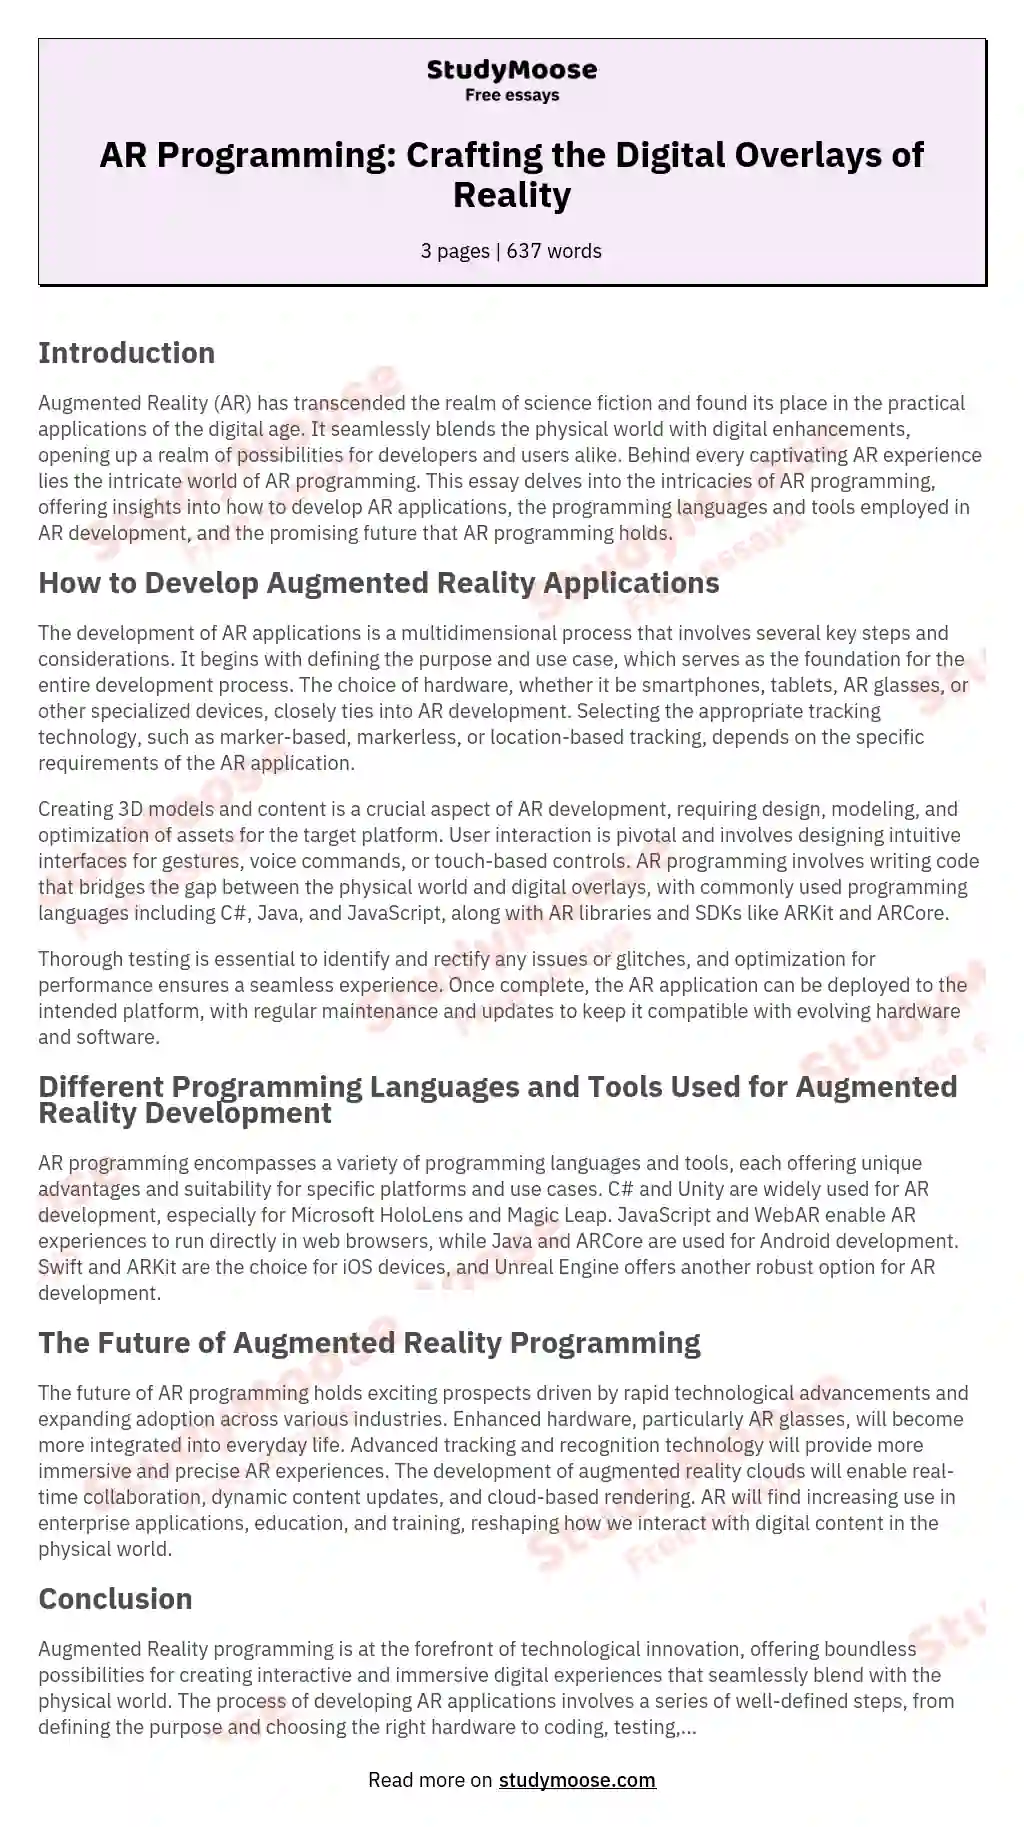 AR Programming: Crafting the Digital Overlays of Reality essay